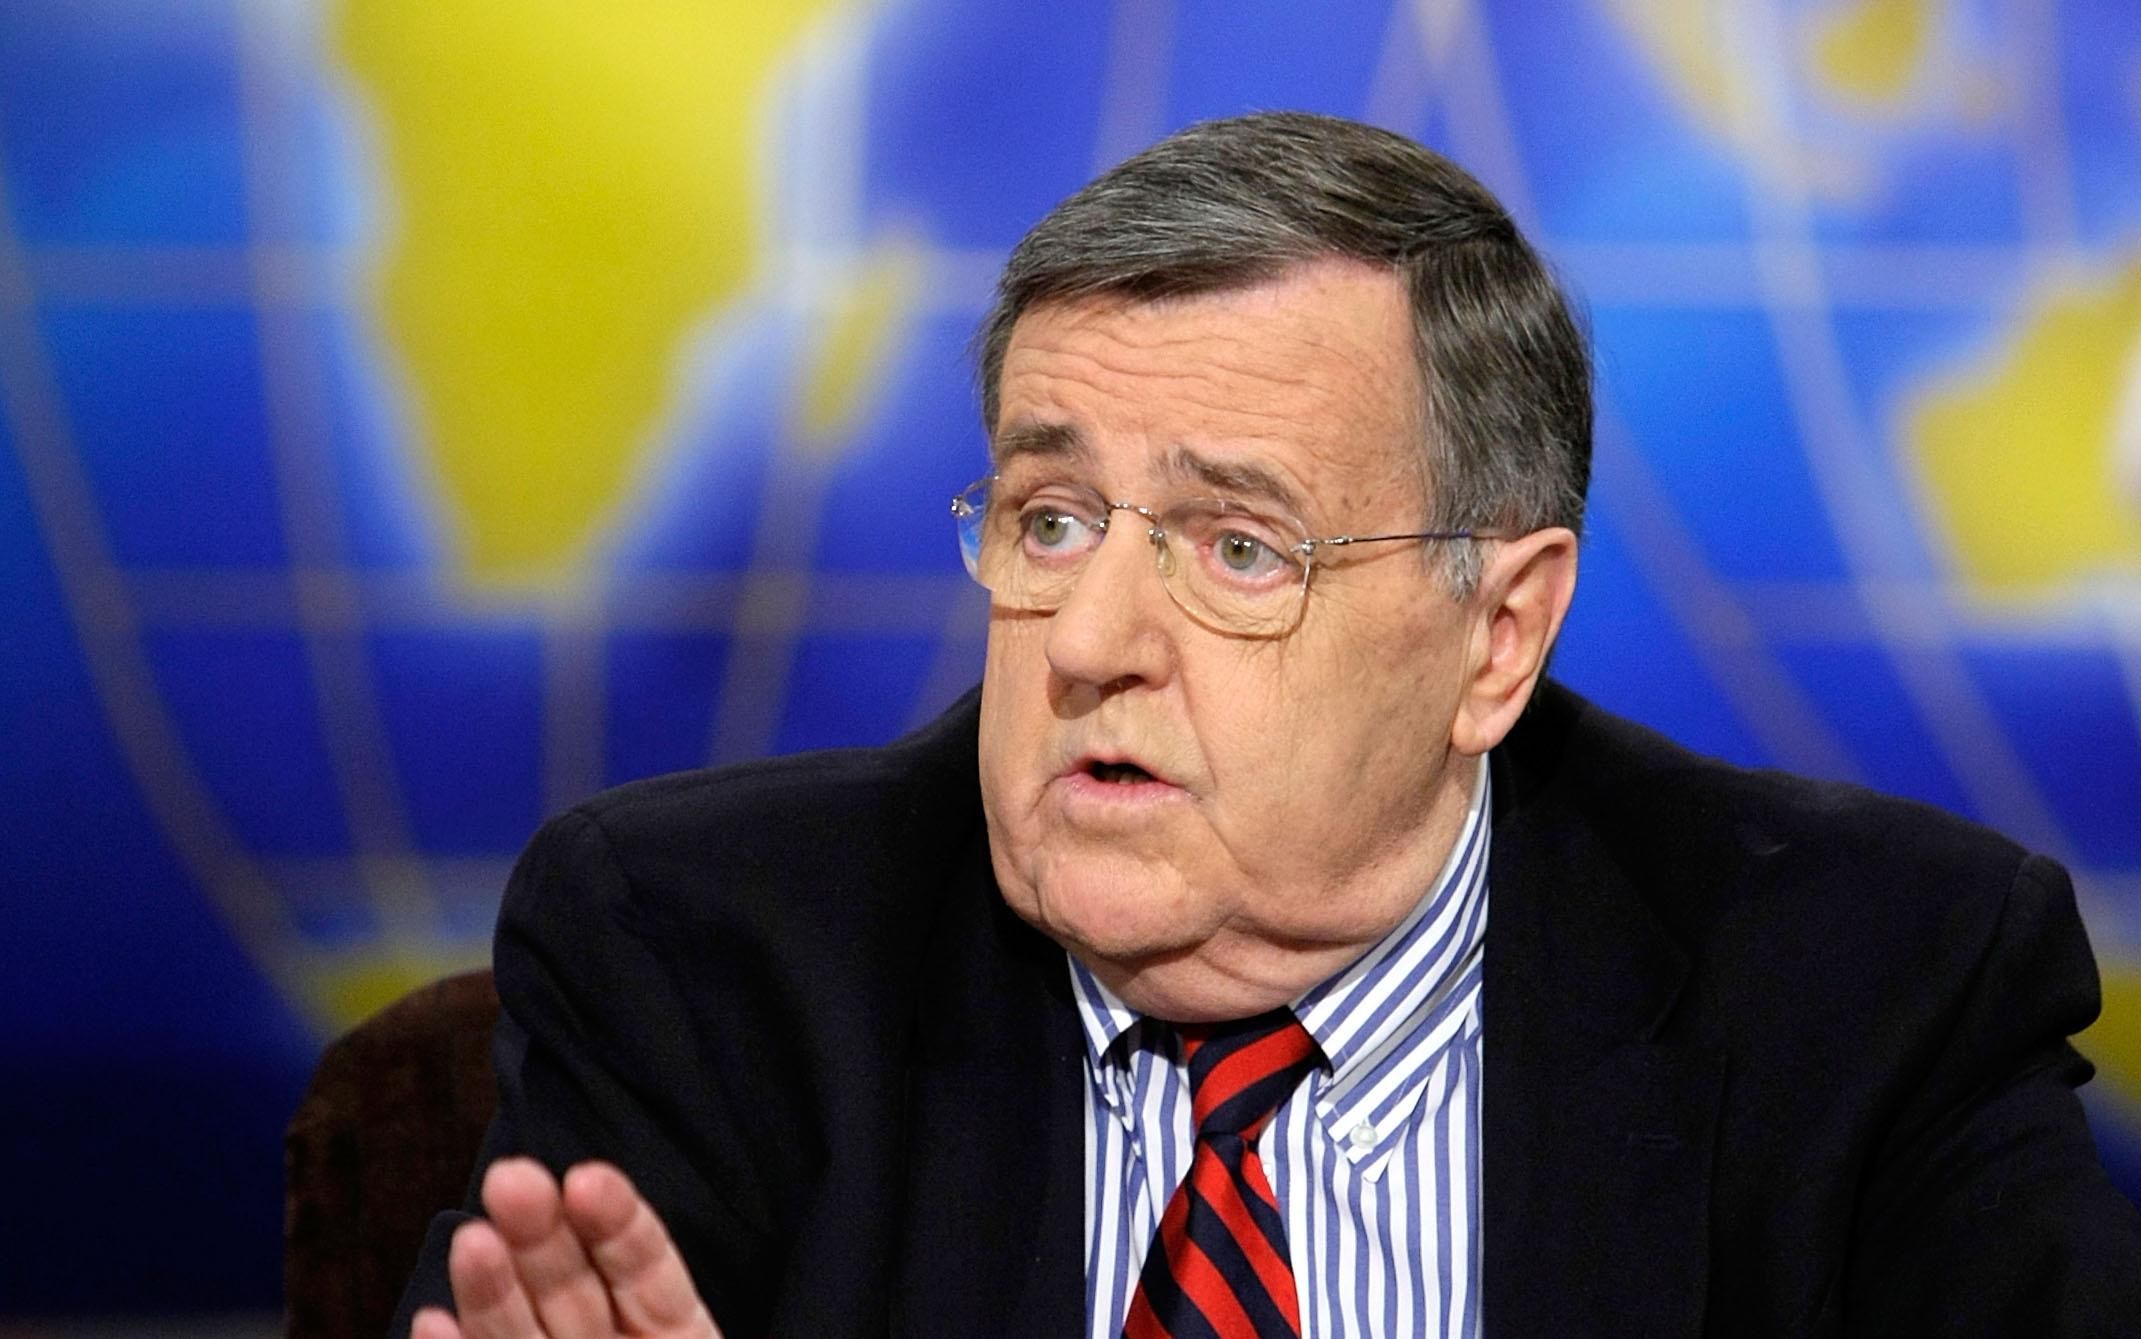 Mark Shields speaks during an NBC appearance